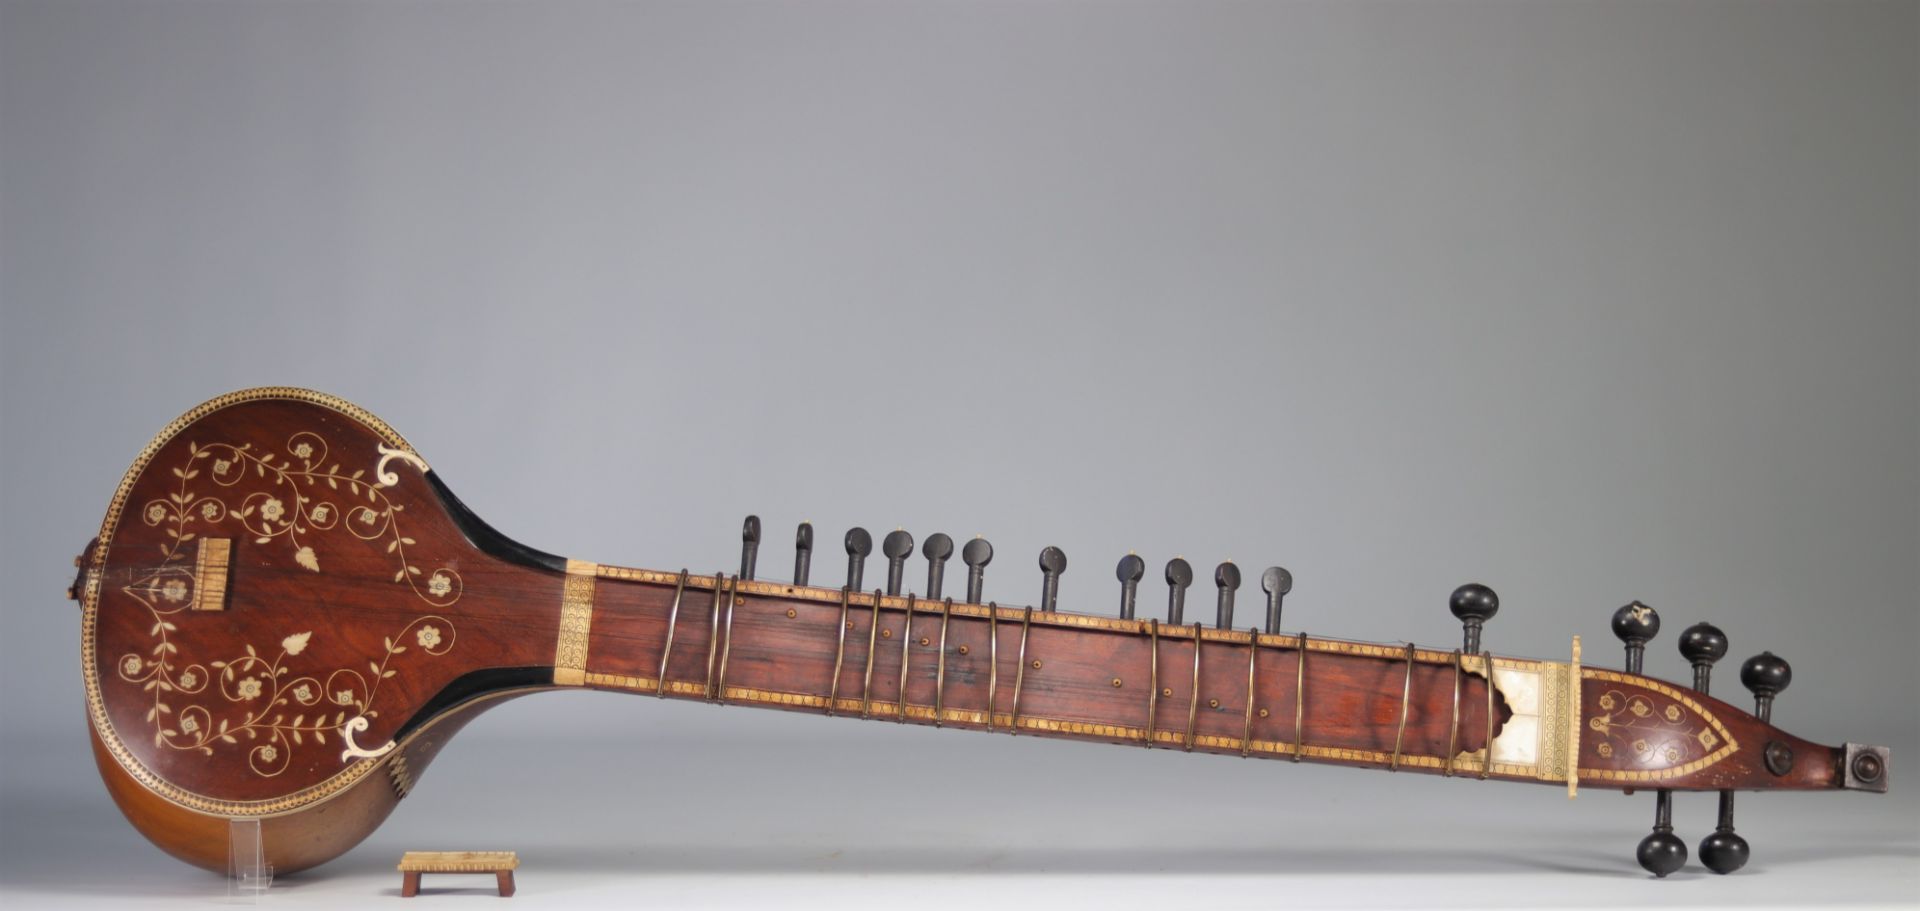 Stringed instrument called "La Vina" from India